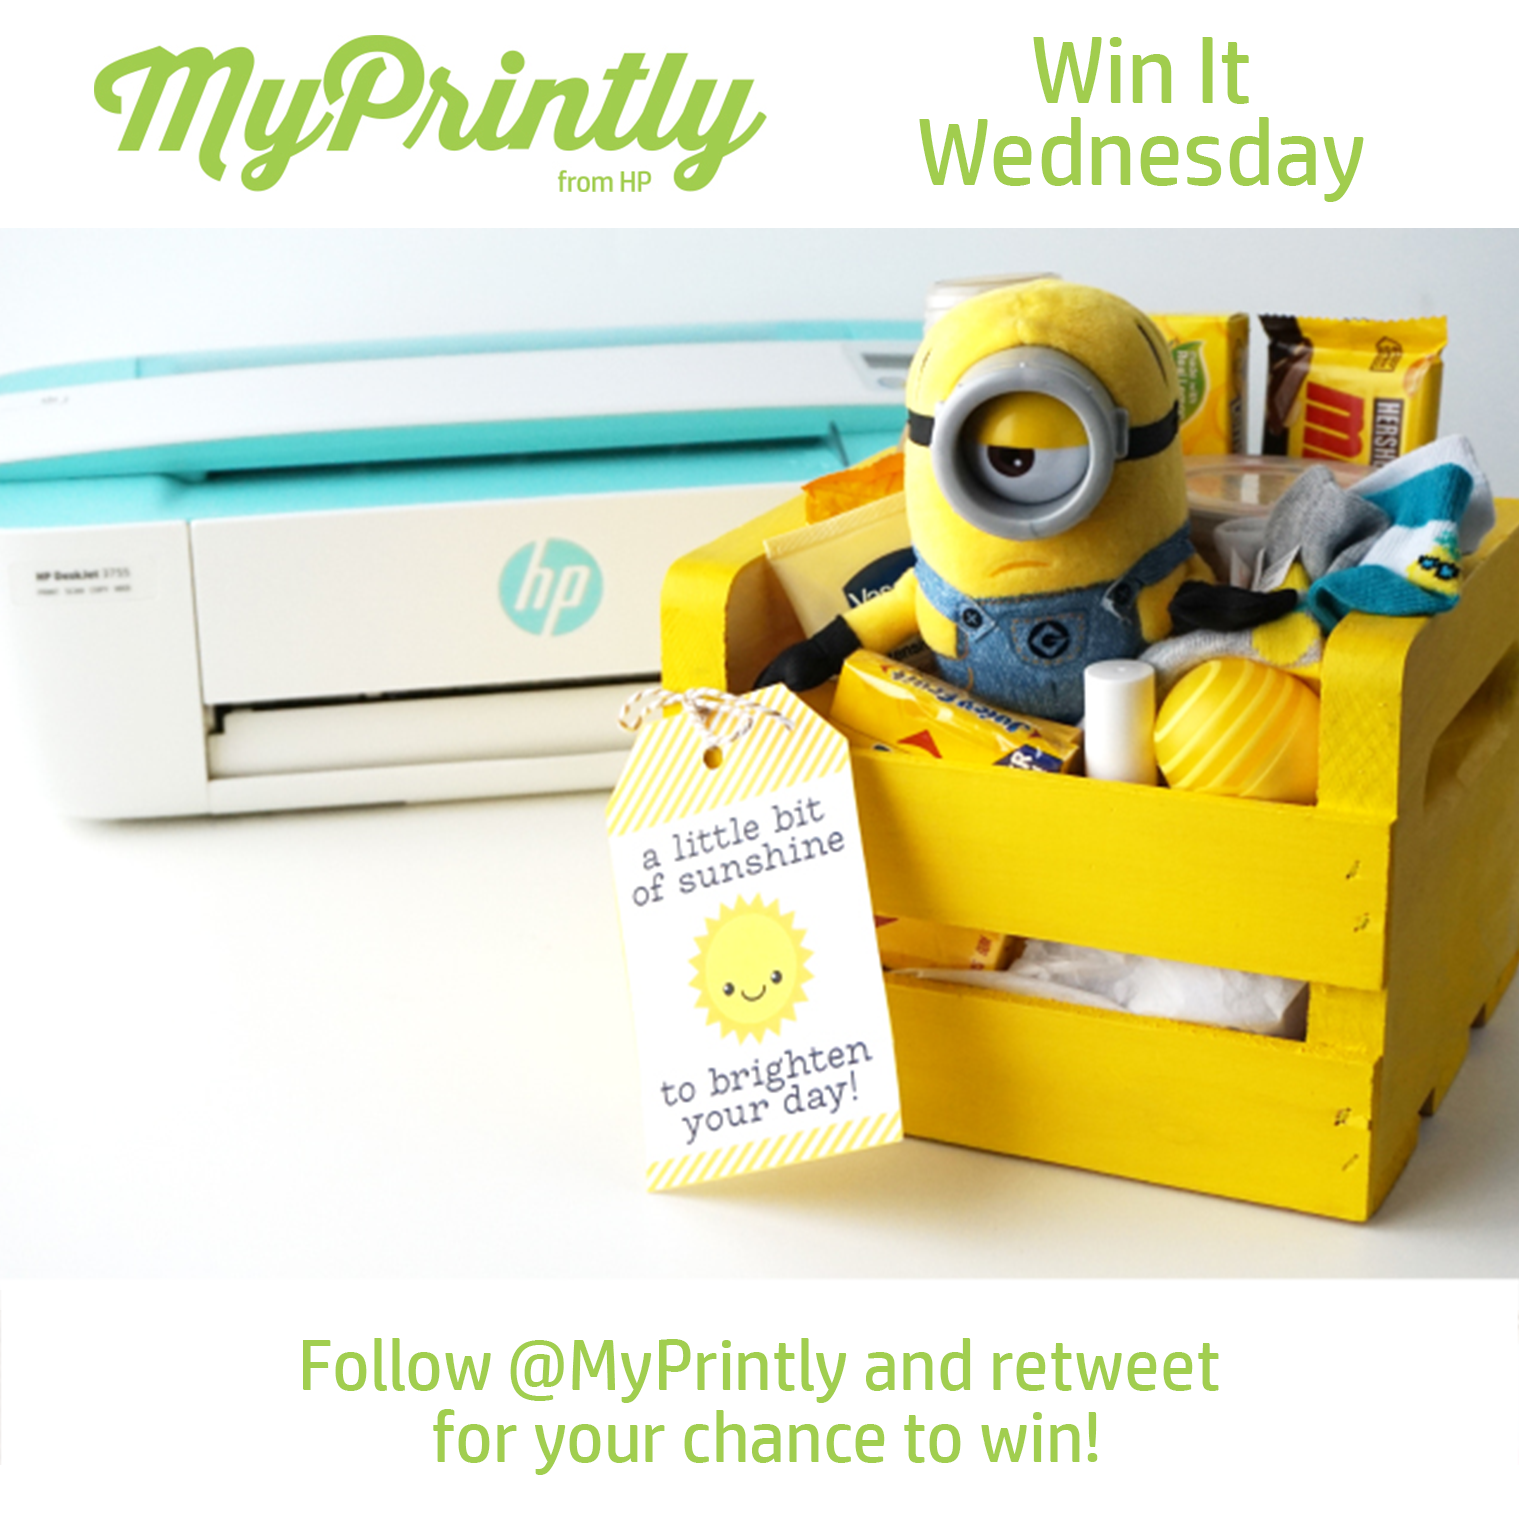 Follow @MyPrintly and retweet to enter to win the supplies to create this c...